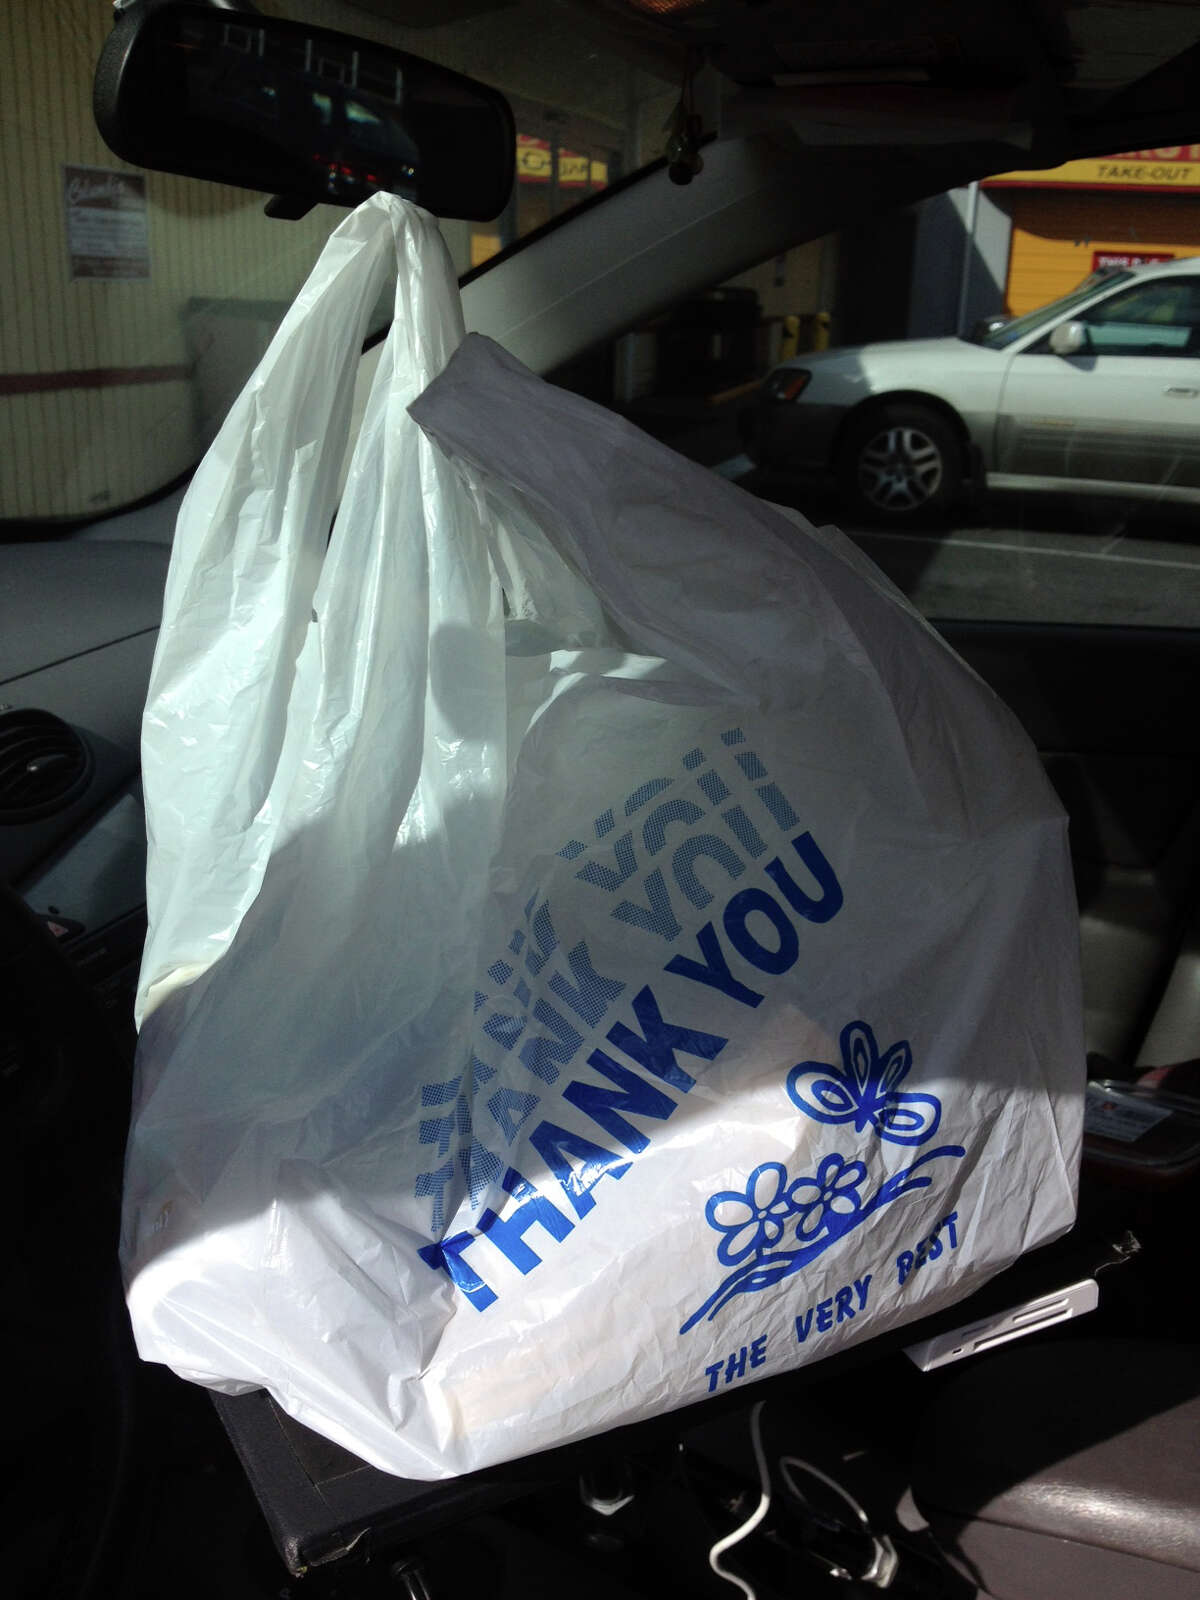 Seattle retailers were told they could be fined $250 for using plastic bags banned by a city ordinance. But no businesses have been fined. The city also has not fined businesses for failing to sort their recycling, which has been required by city ordinance since 2006. This plastic bag was used be a Seattle retailer last month.